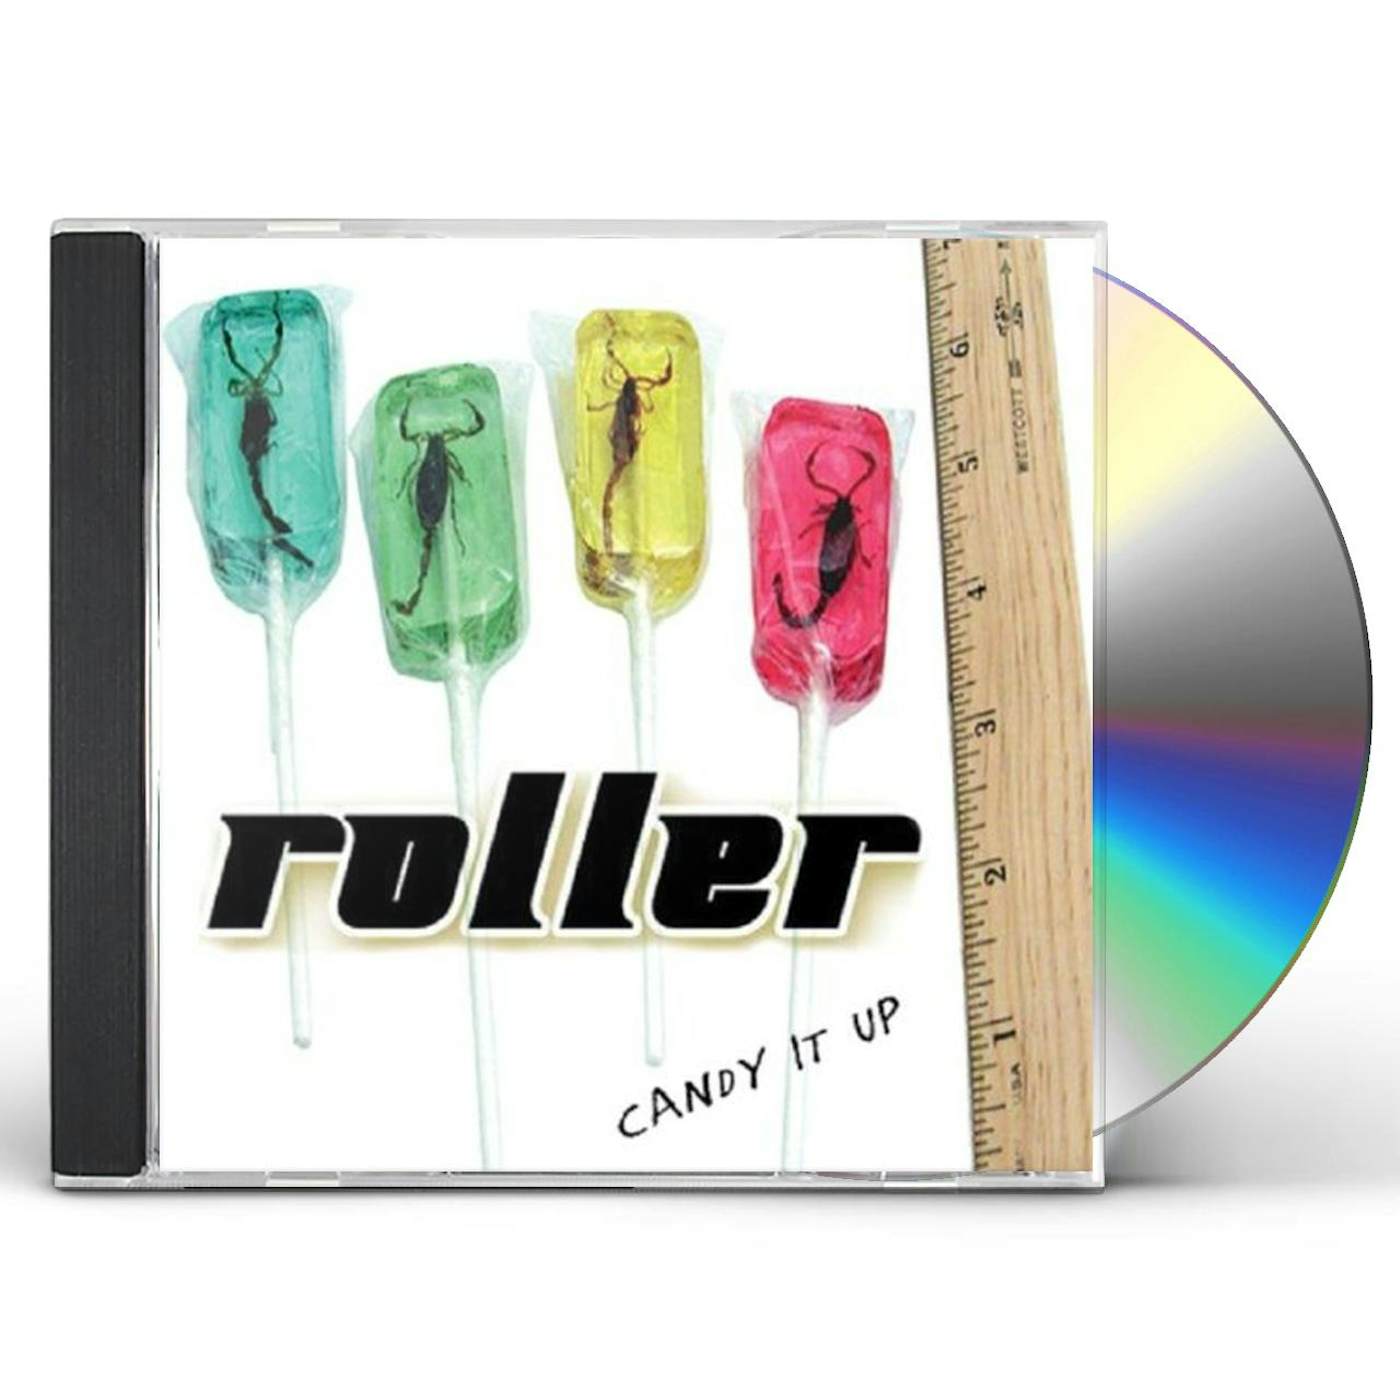 Roller CANDY IT UP CD